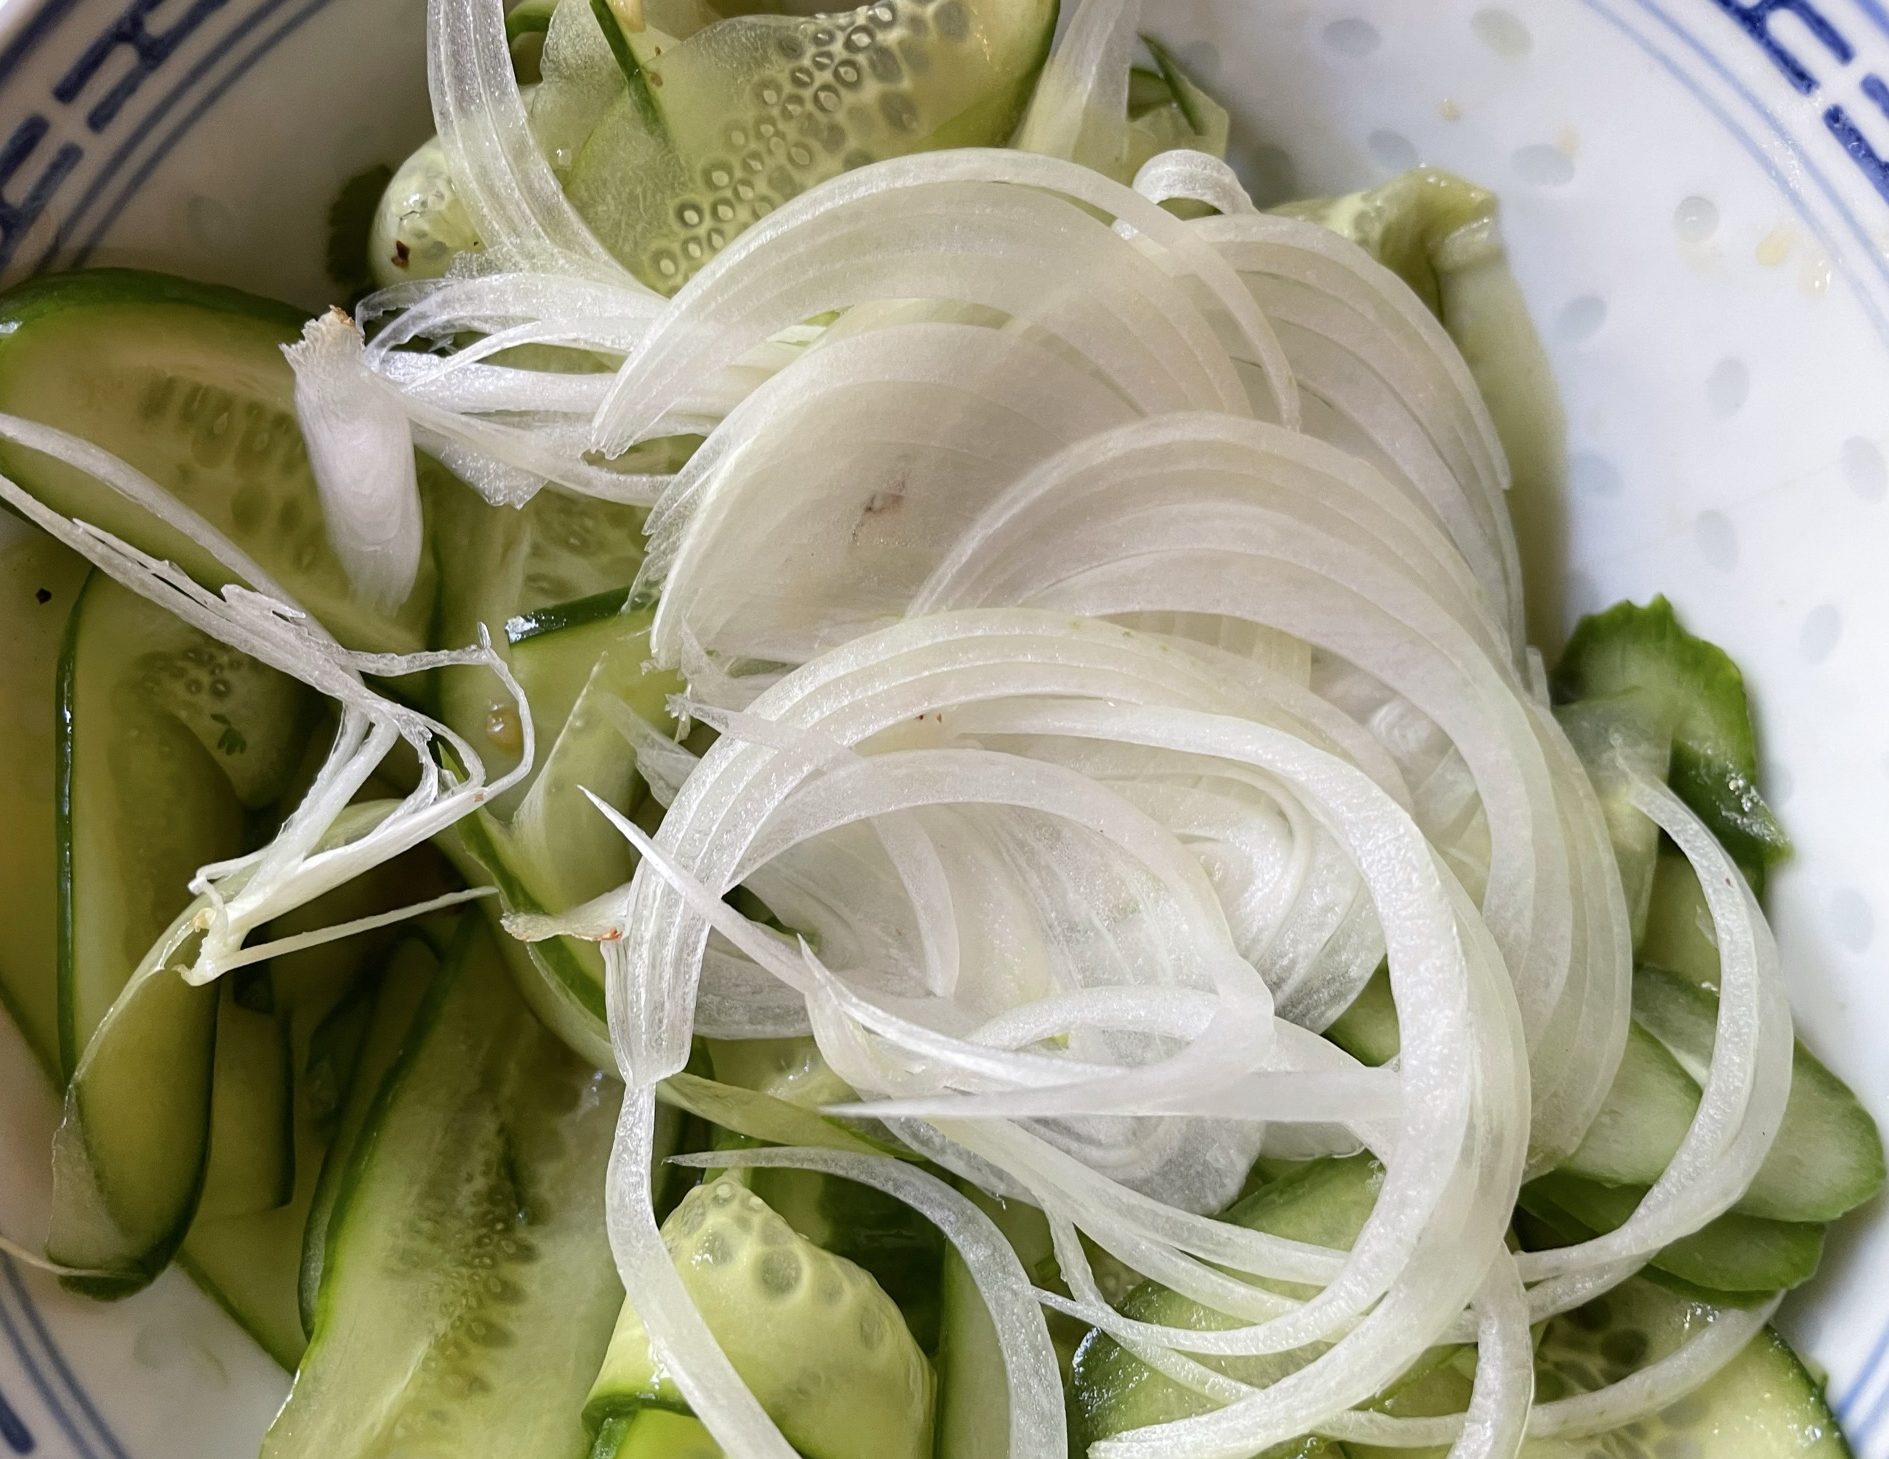 Thinly sliced onion and cucumber